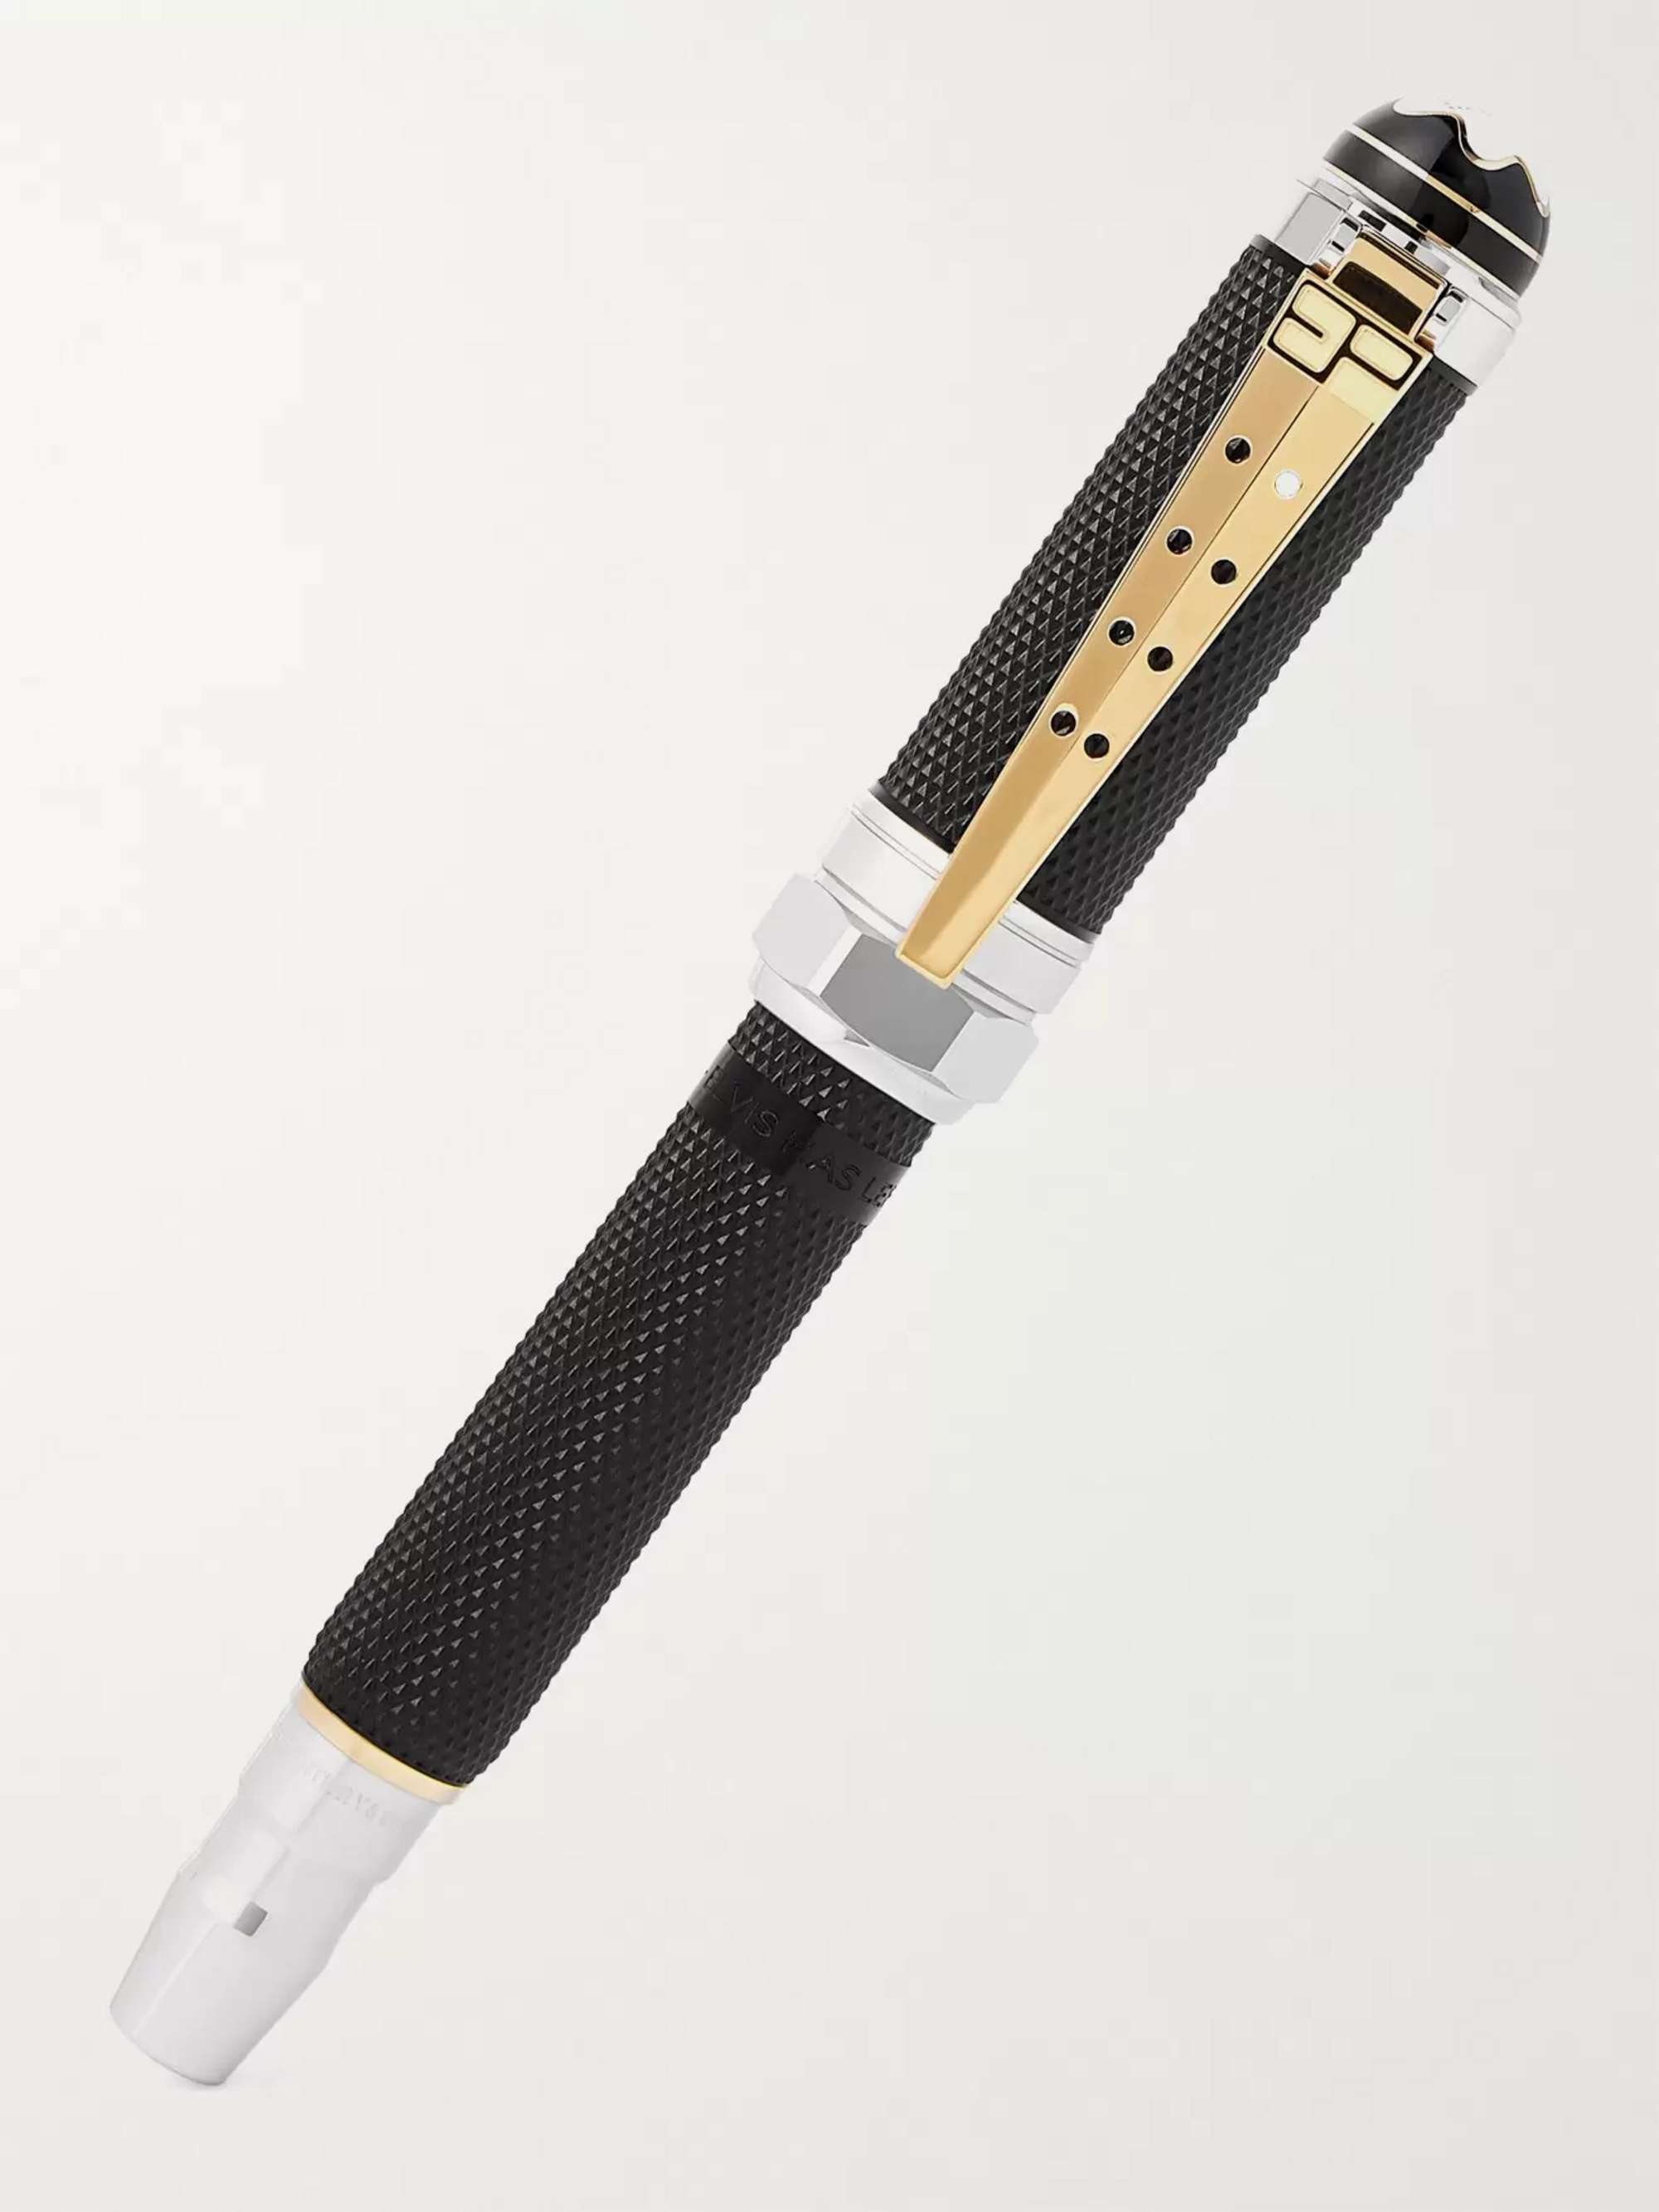 MONTBLANC Great Characters Elvis Presley Resin, Rhodium and Gold-Plated Fountain Pen